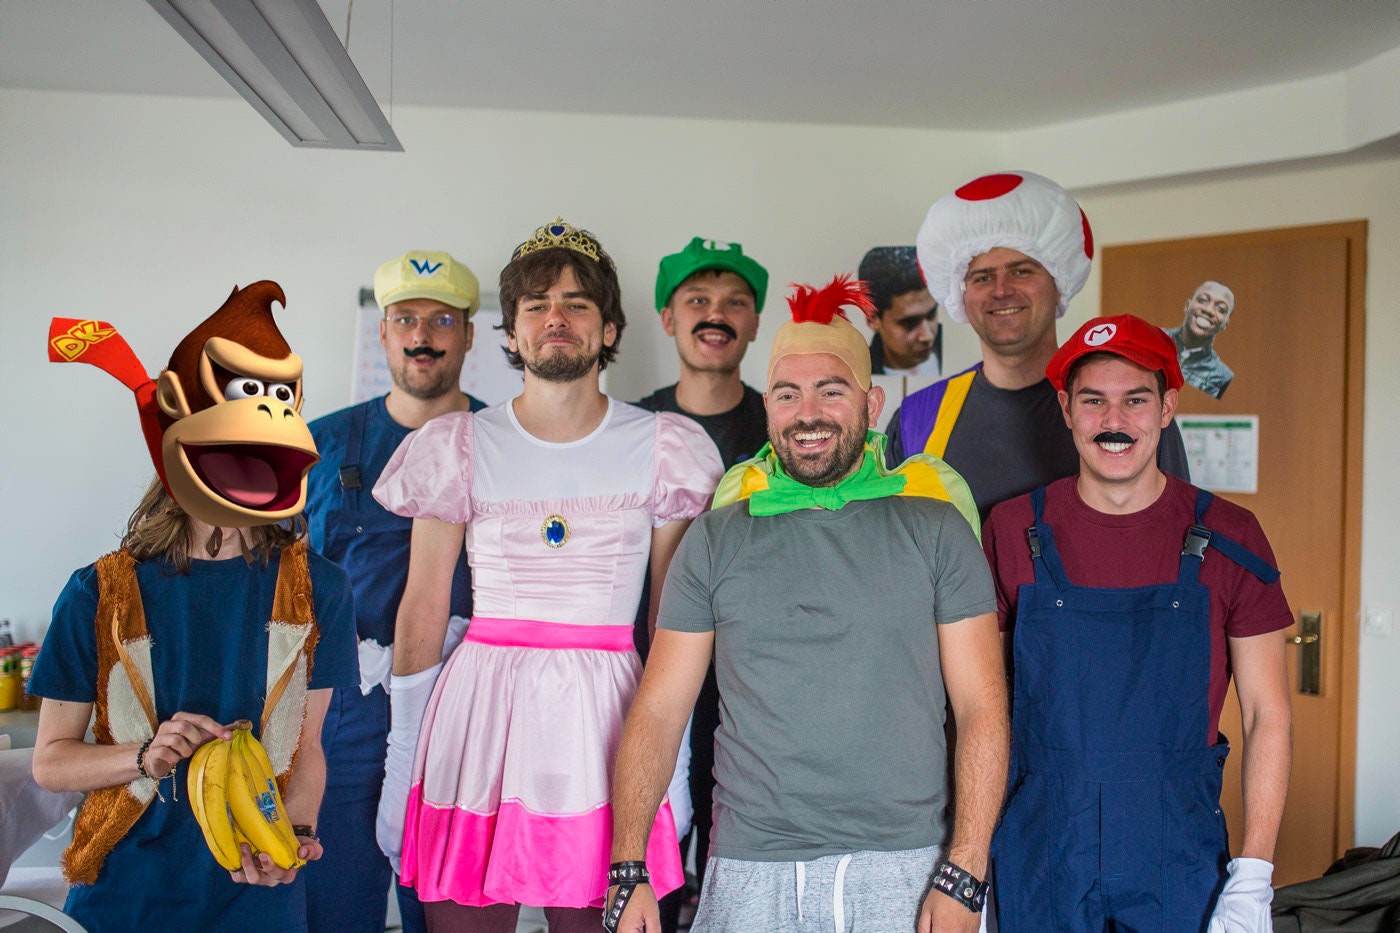 The Transloadit team all dressed up as characters from Mario.